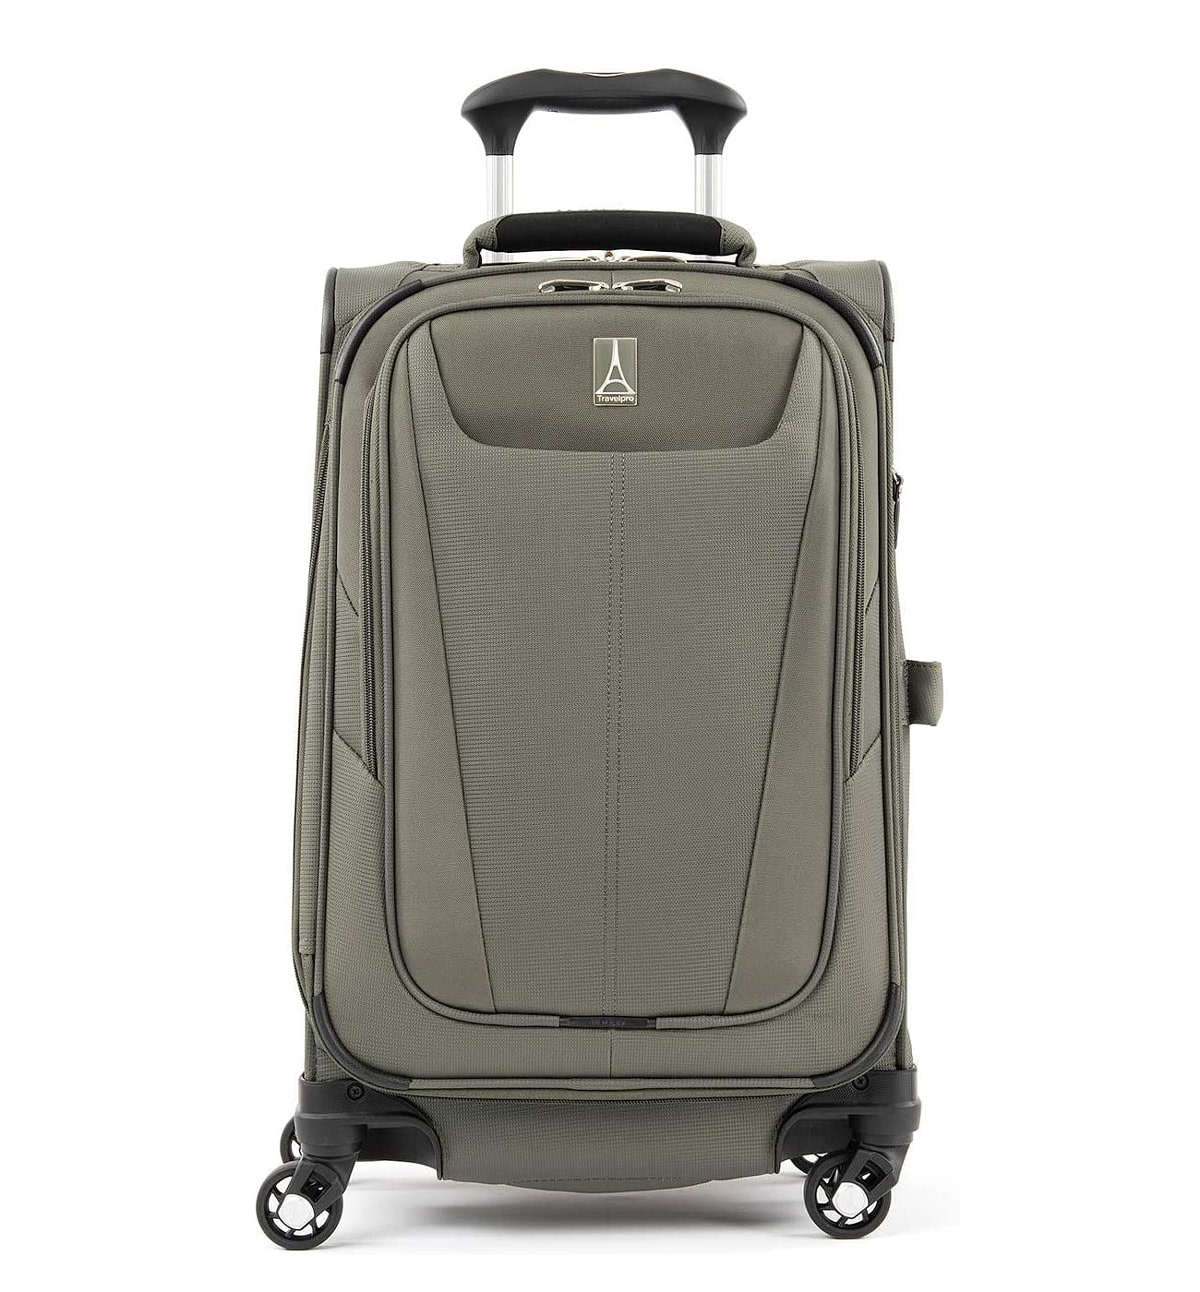 Travelpro sale of hand luggage